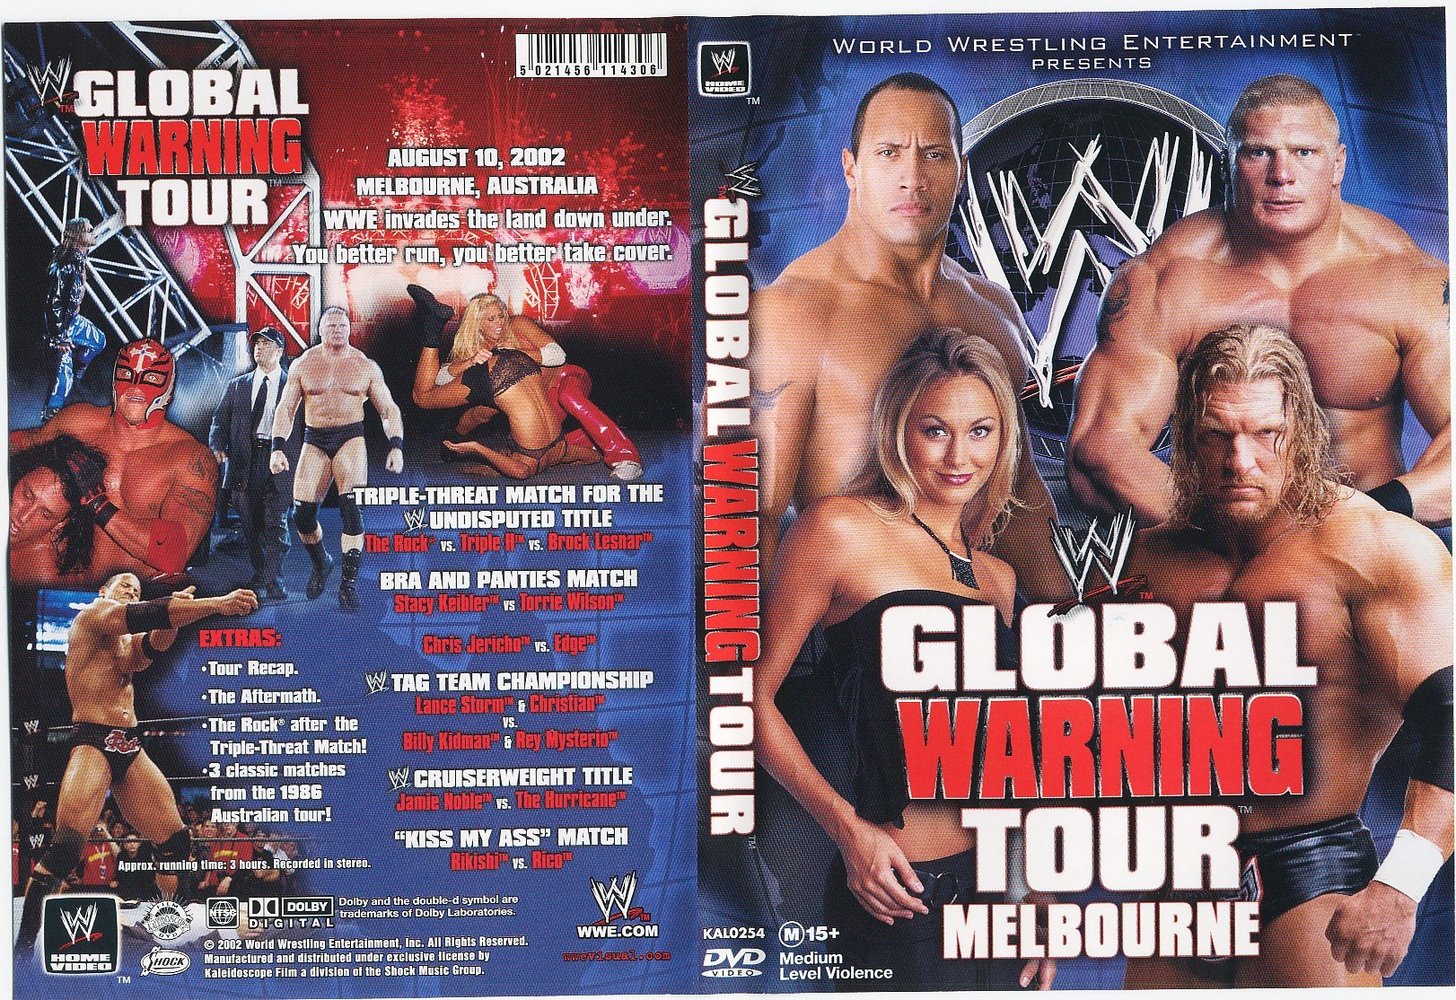 Jaquette DVD WWE Global warning tour Melboune 2002